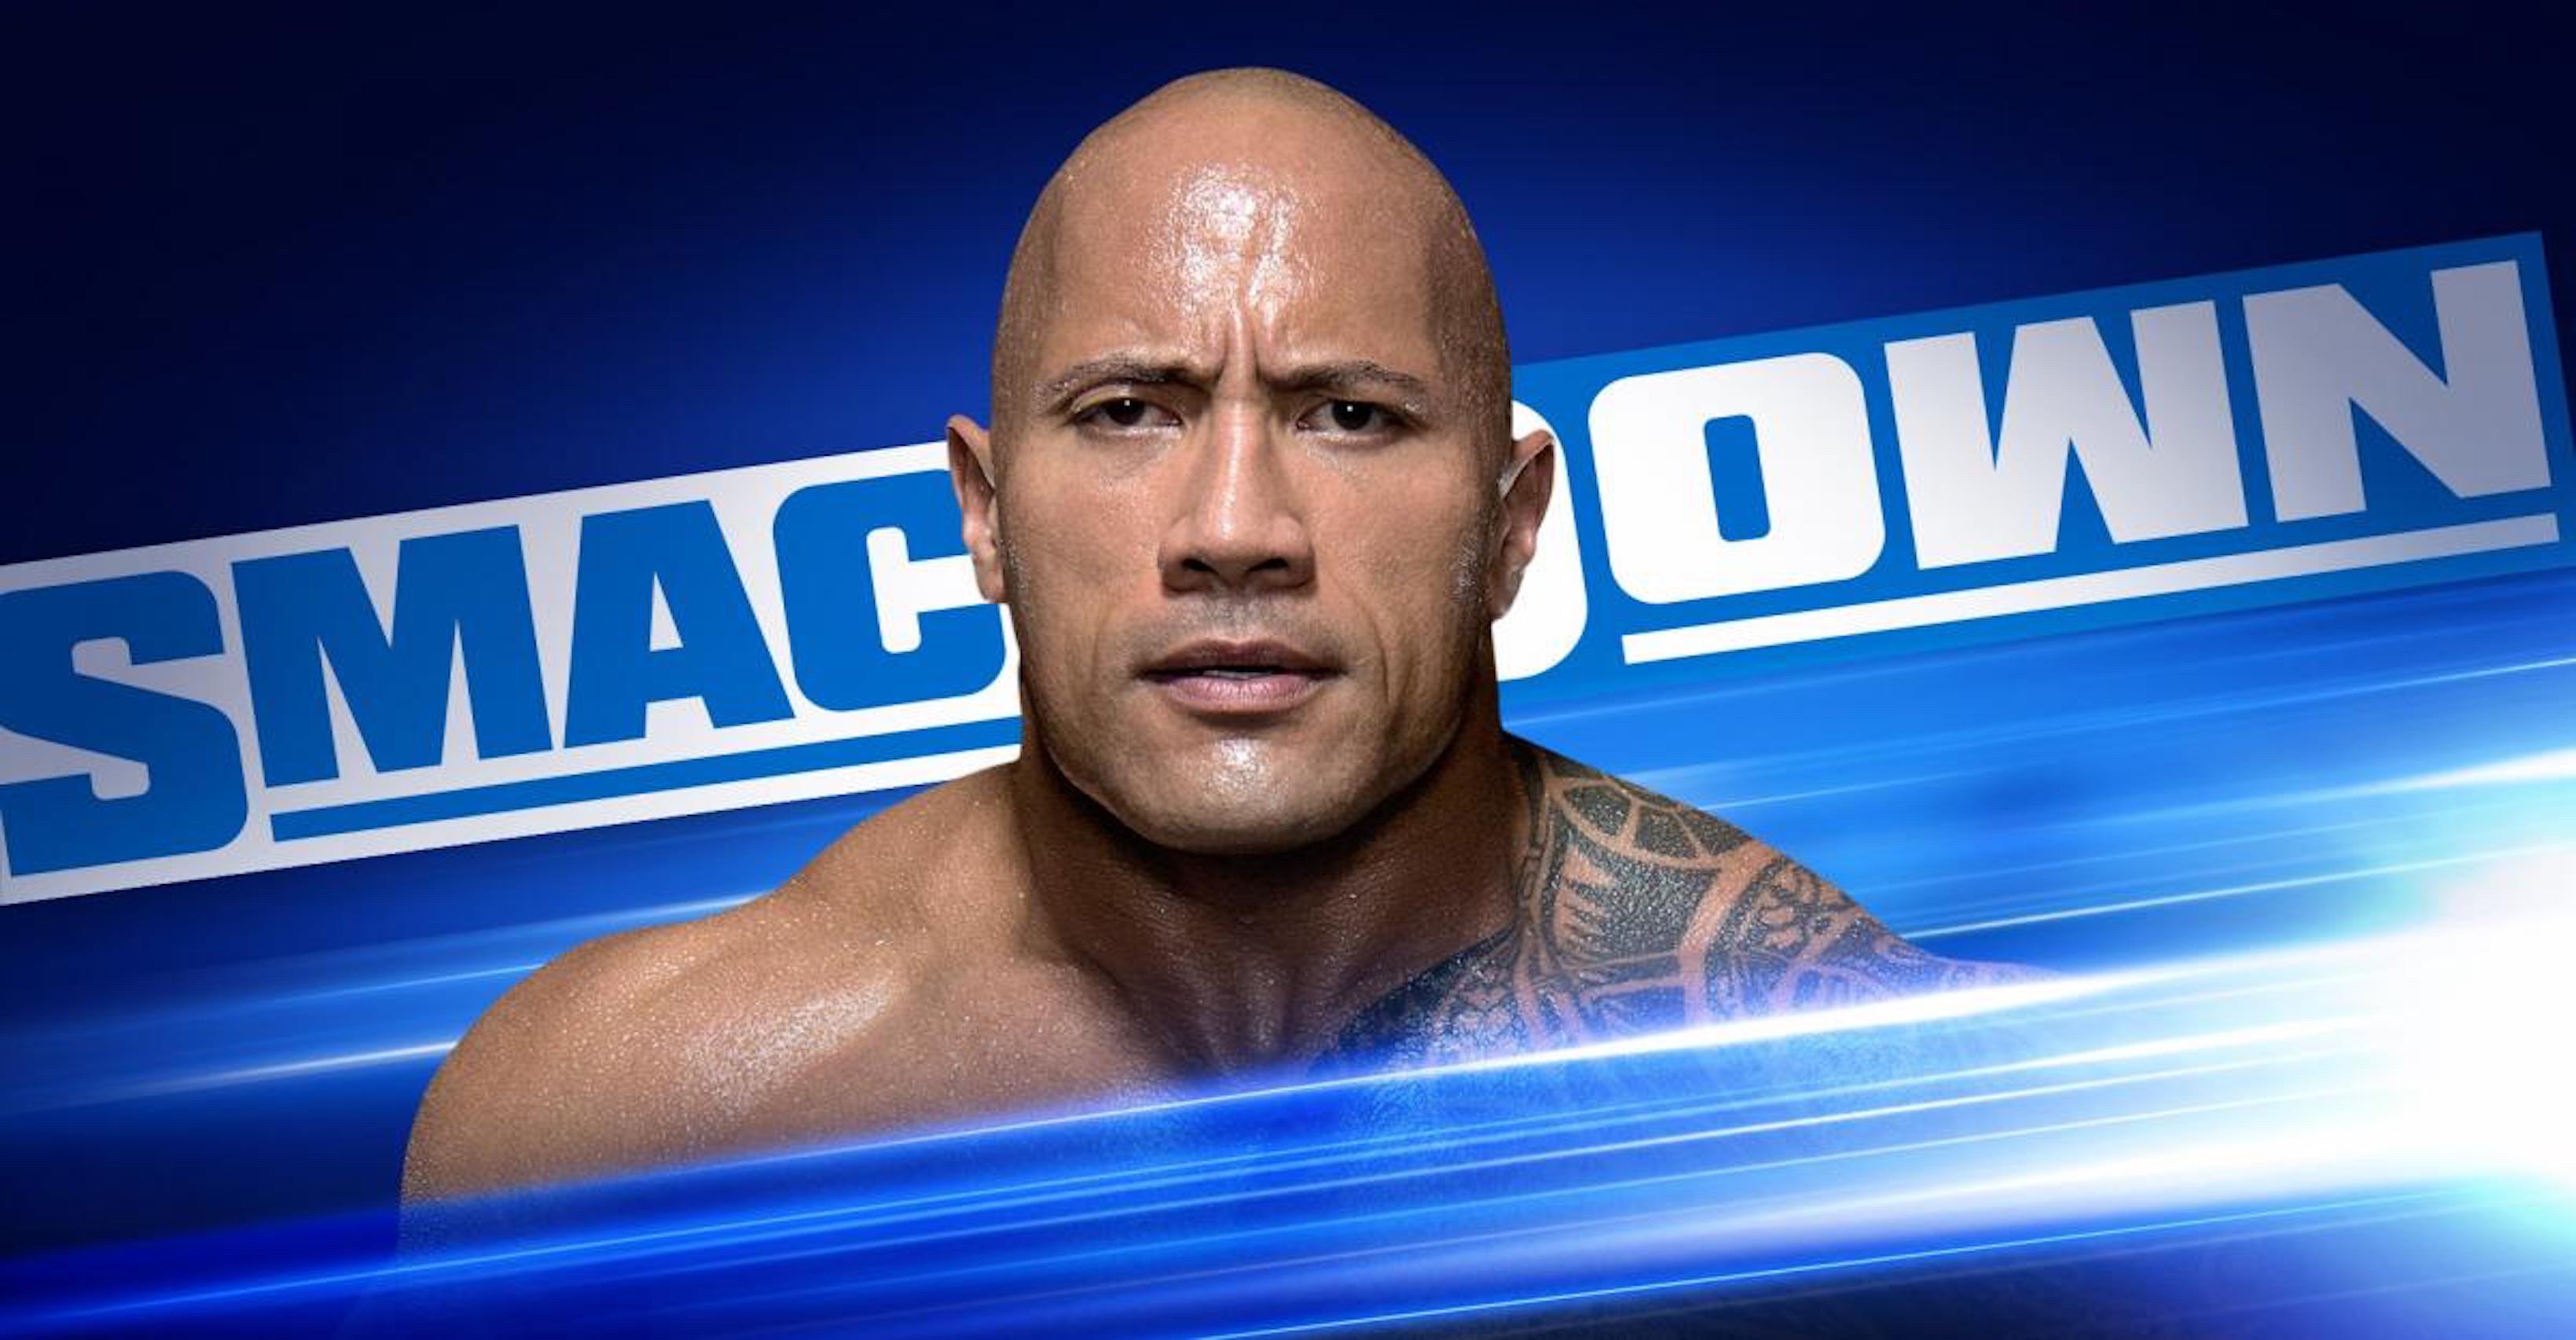 The Rock Confirmed For WWE ‘SmackDown’ Debut On FOX The Sports Daily